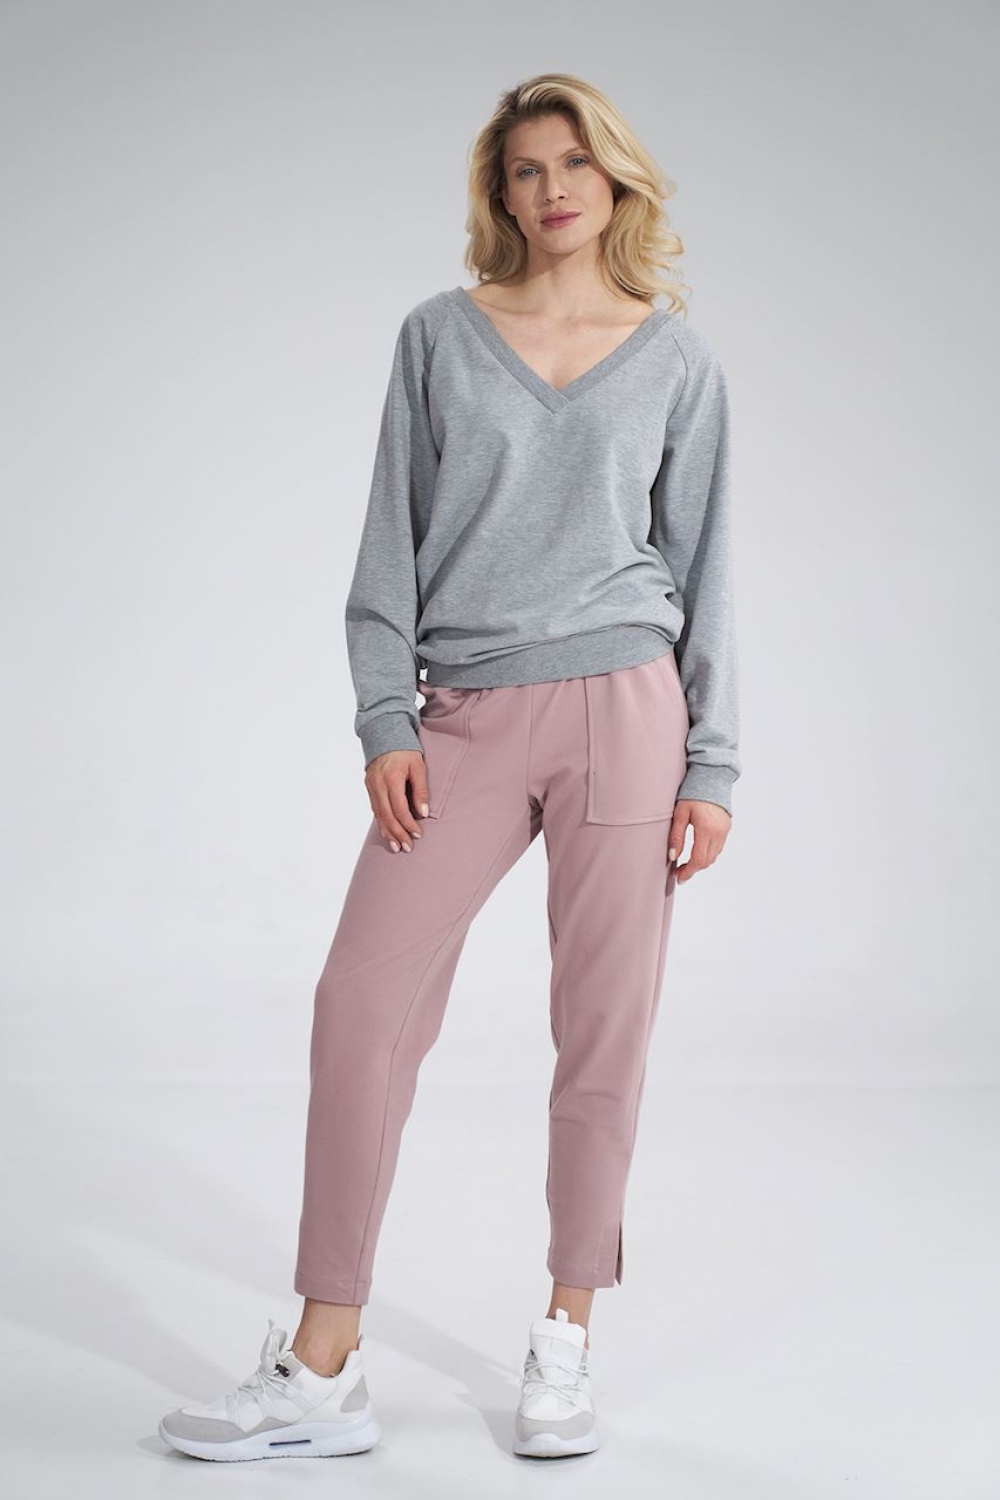  Tracksuit trousers model 155926 Figl  pink